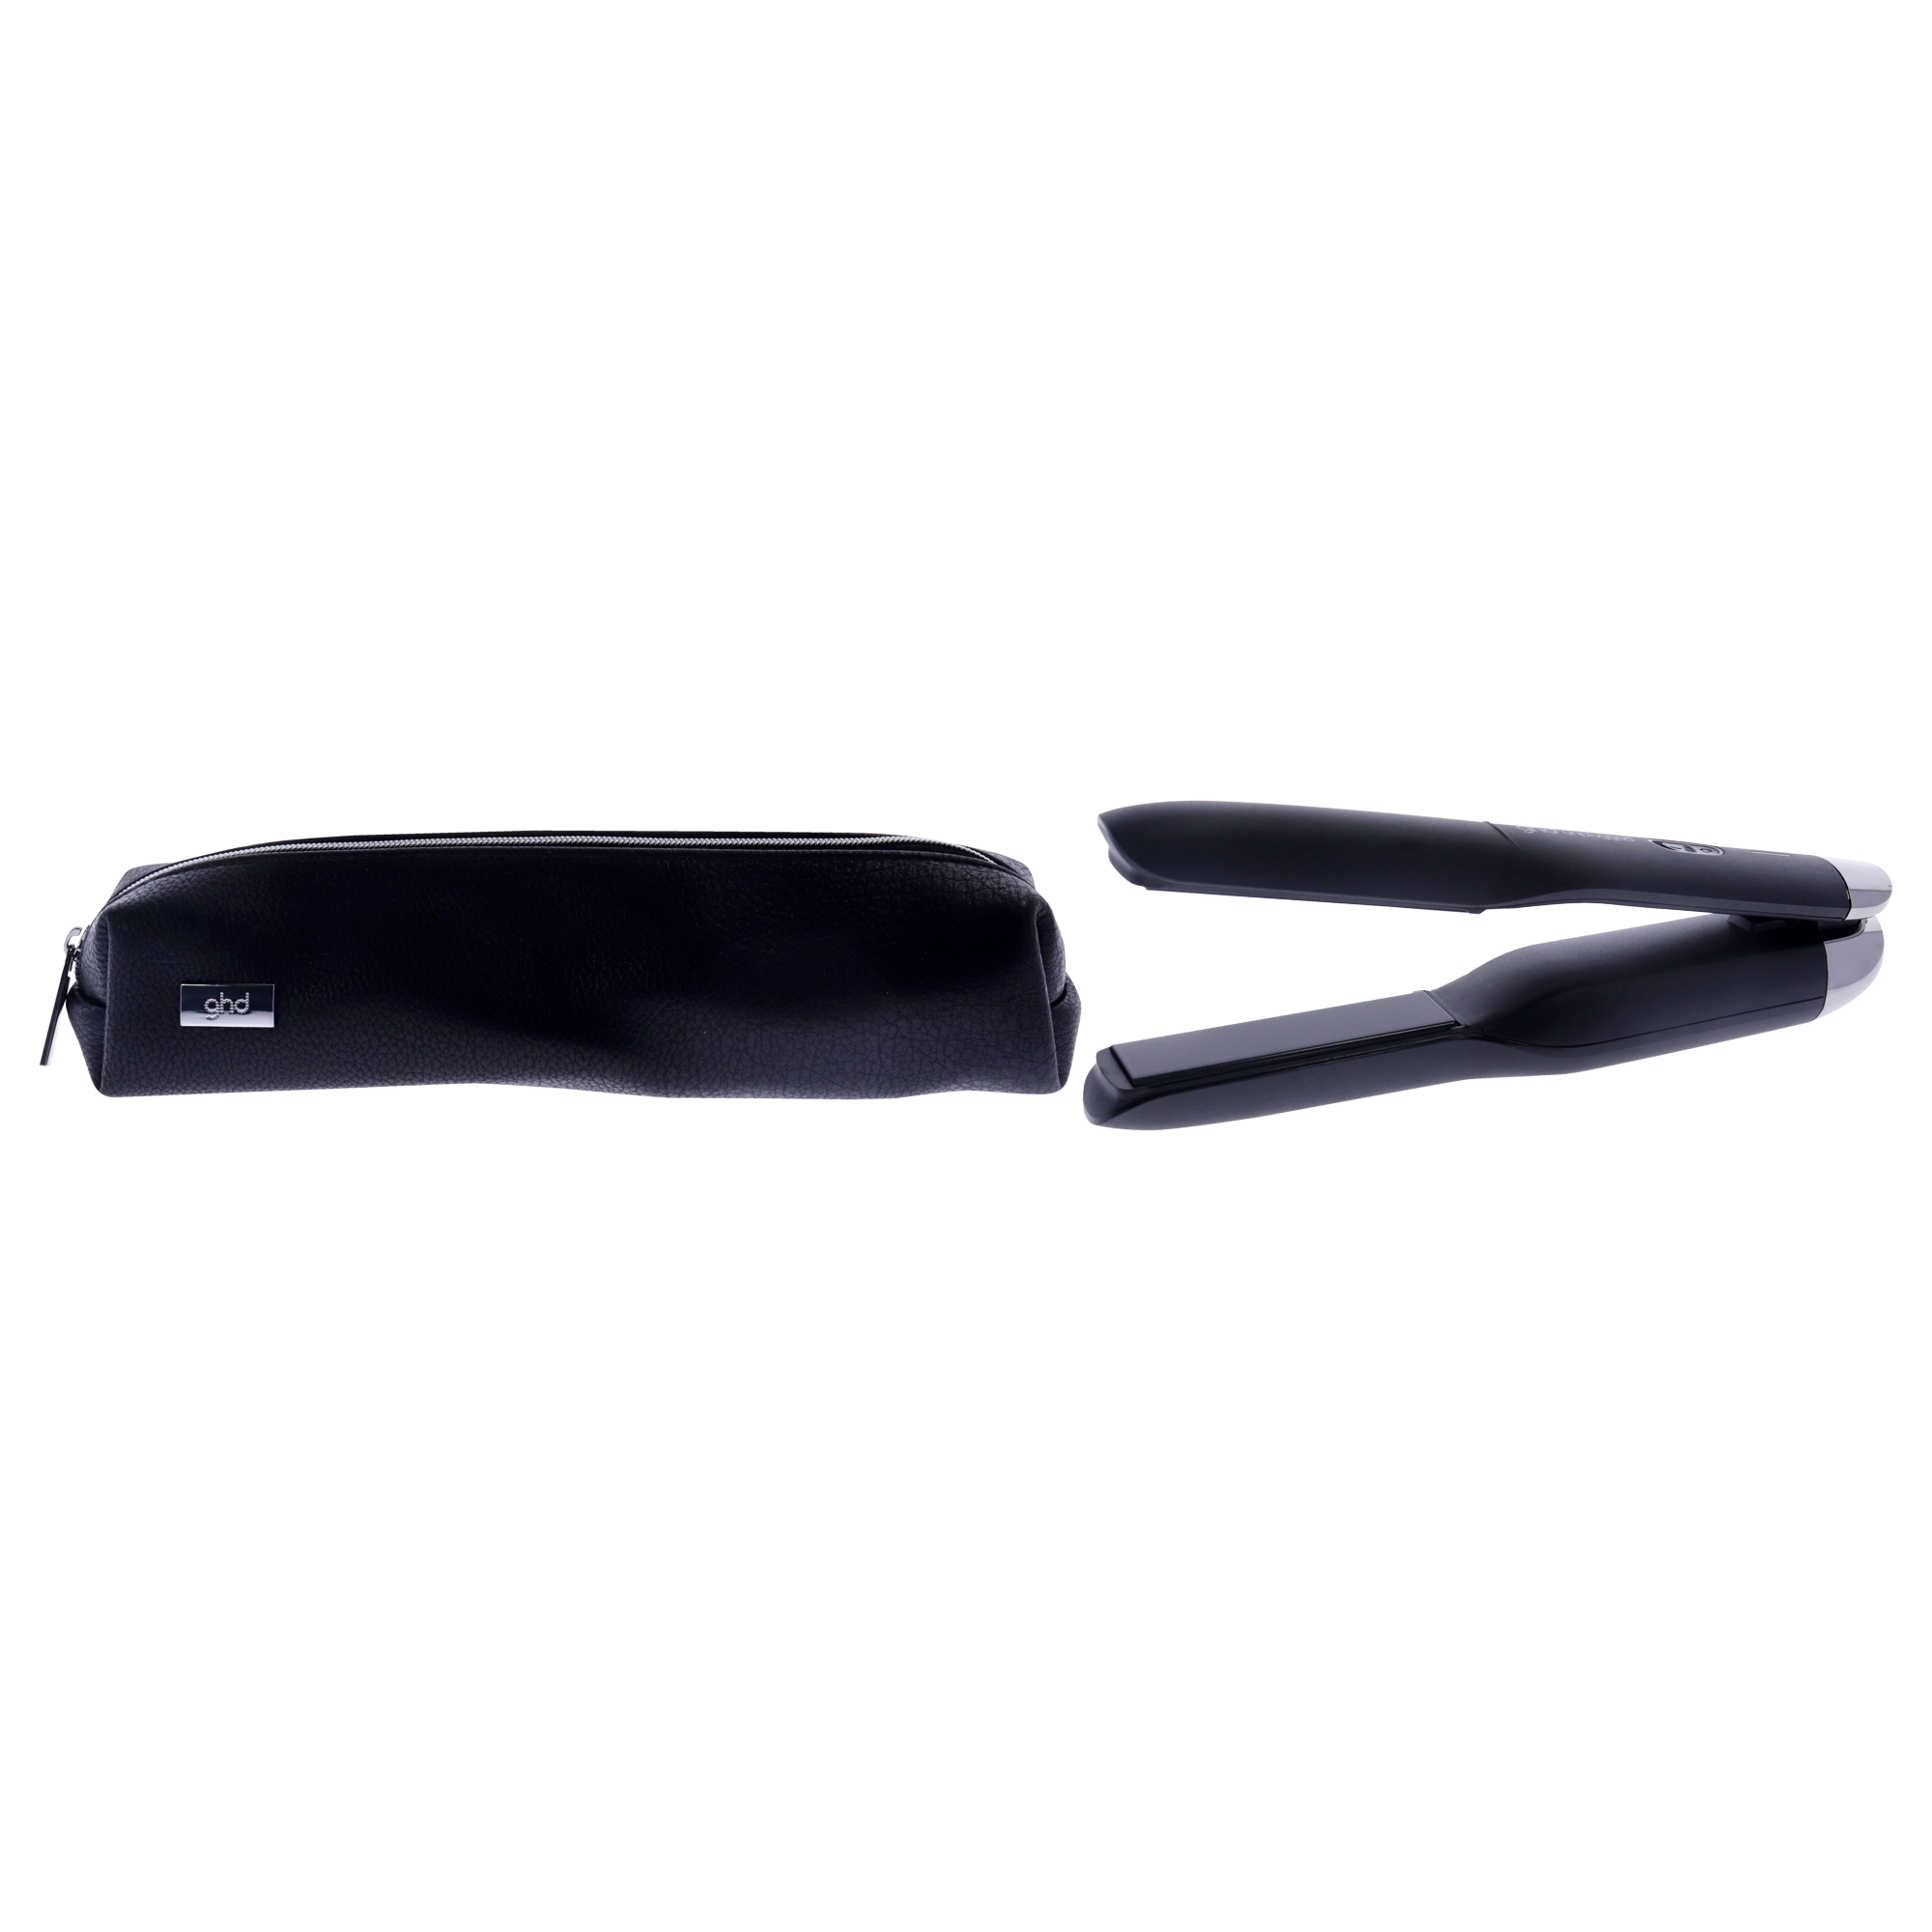 GHD GHD Unplugged Cordless Styler - Black , 1 Inch Flat Iron - image 2 of 5